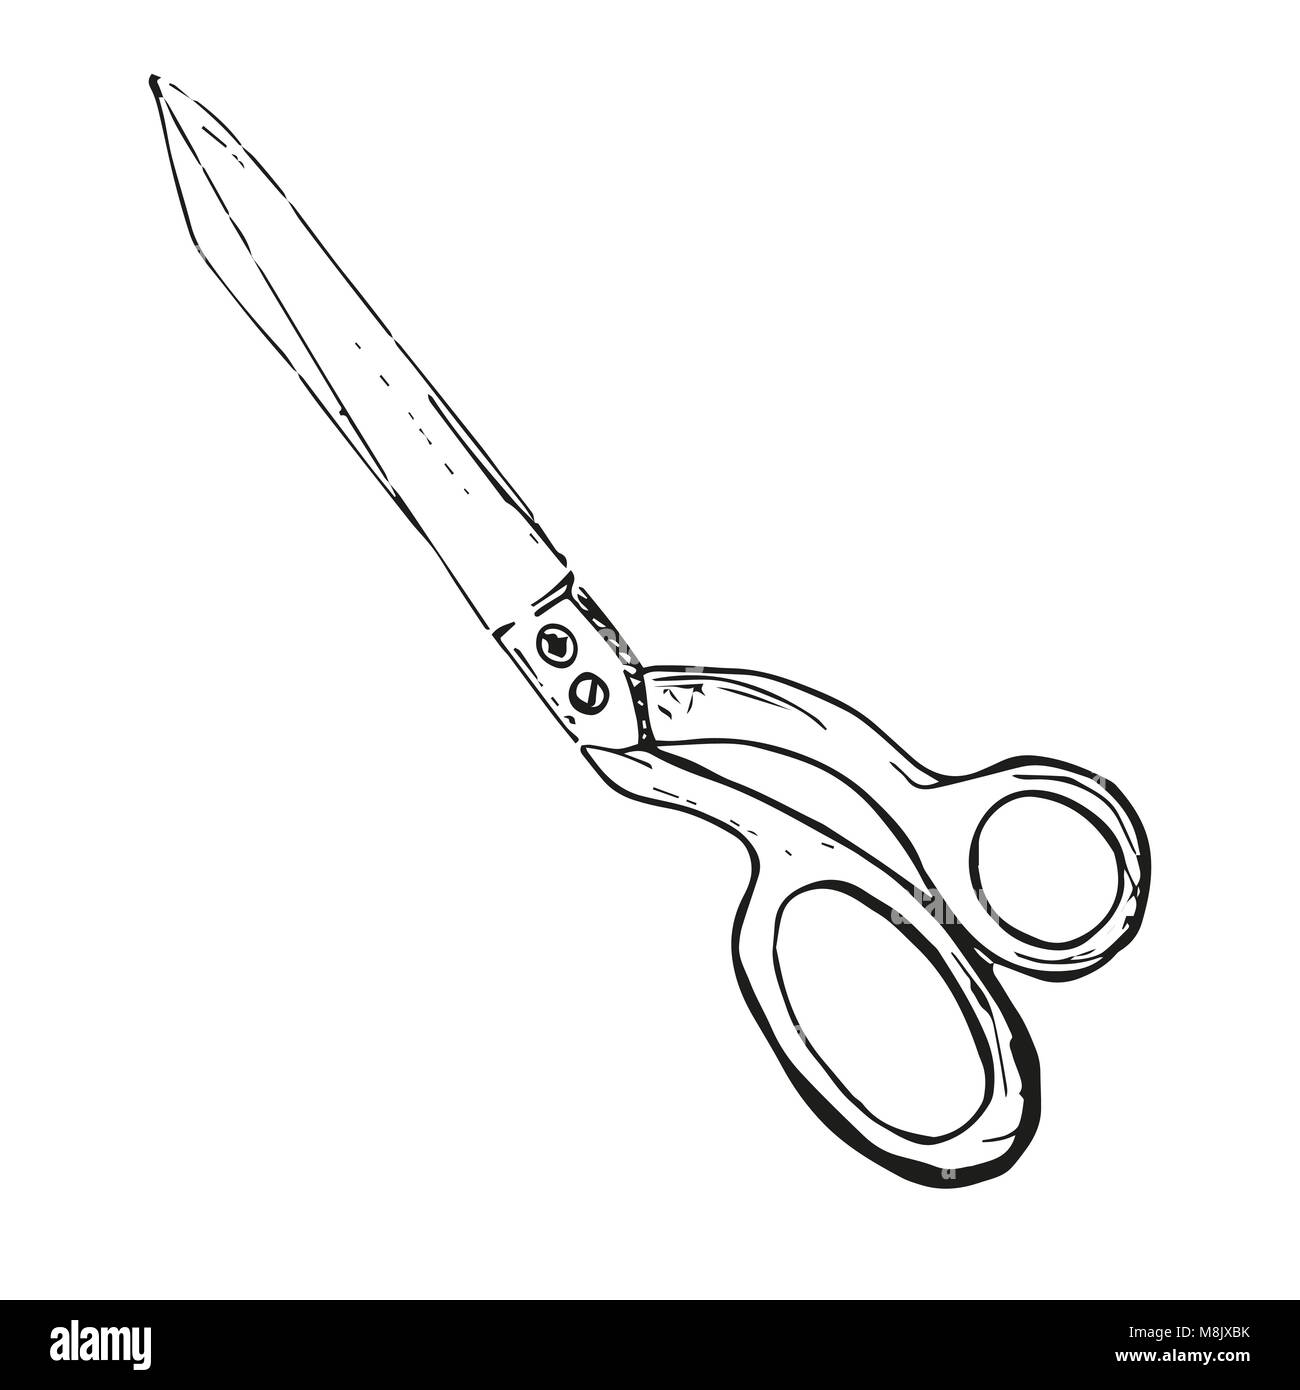 How to Draw a Scissors step by step  6 Easy Phase